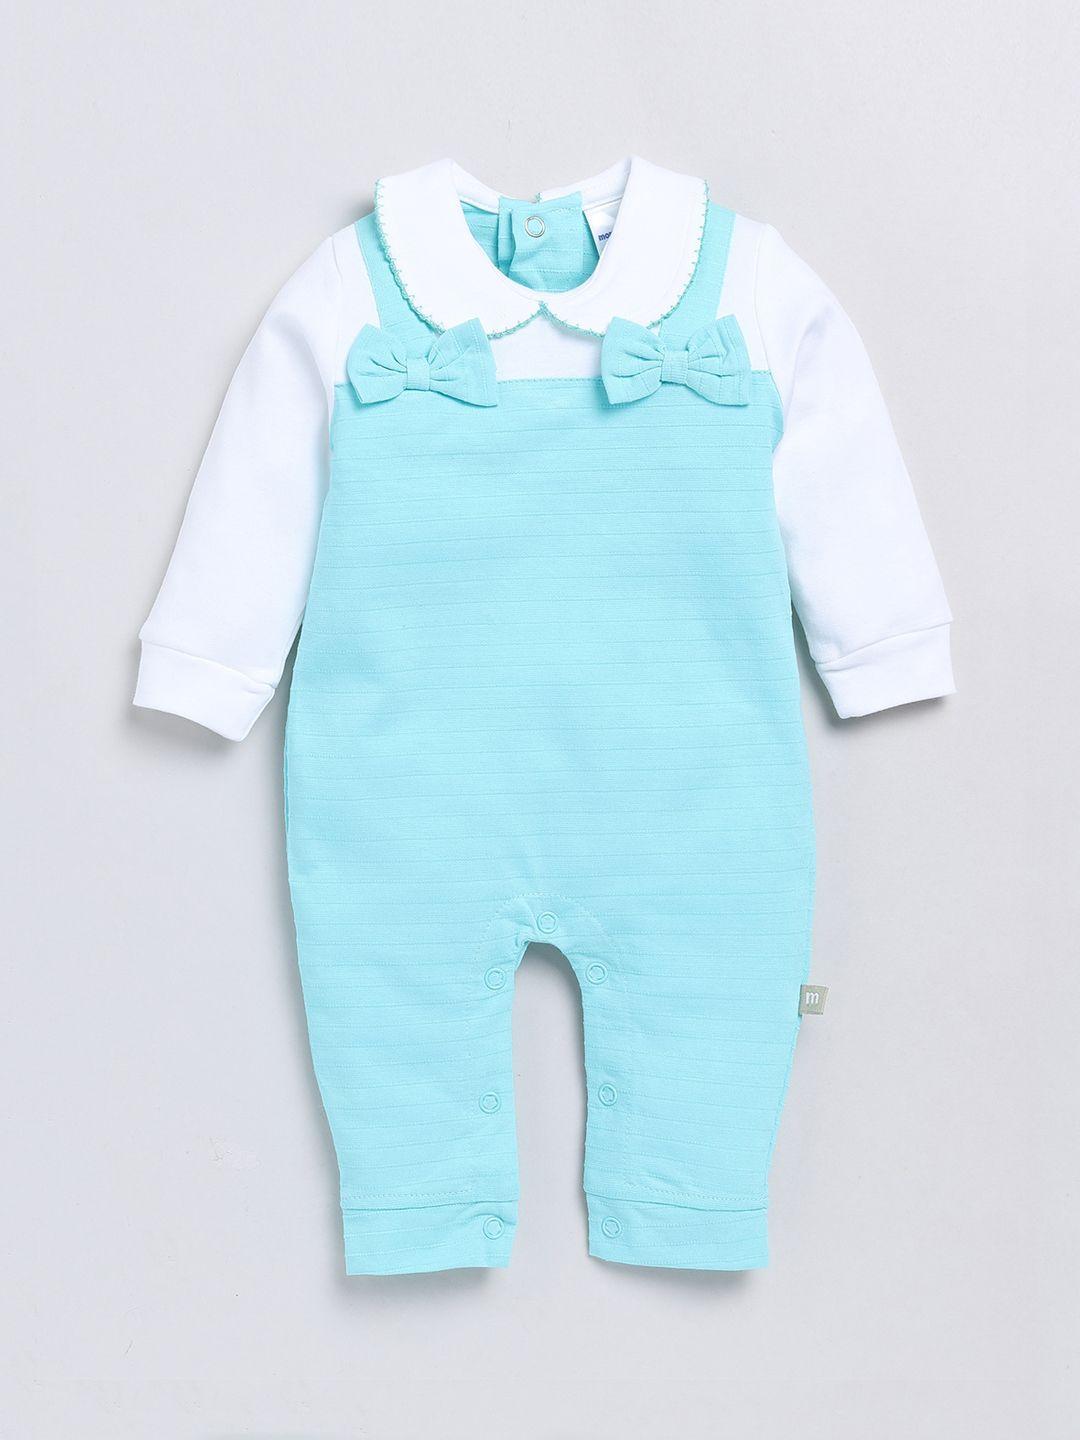 moms-love-infant-girls-striped-cotton-rompers